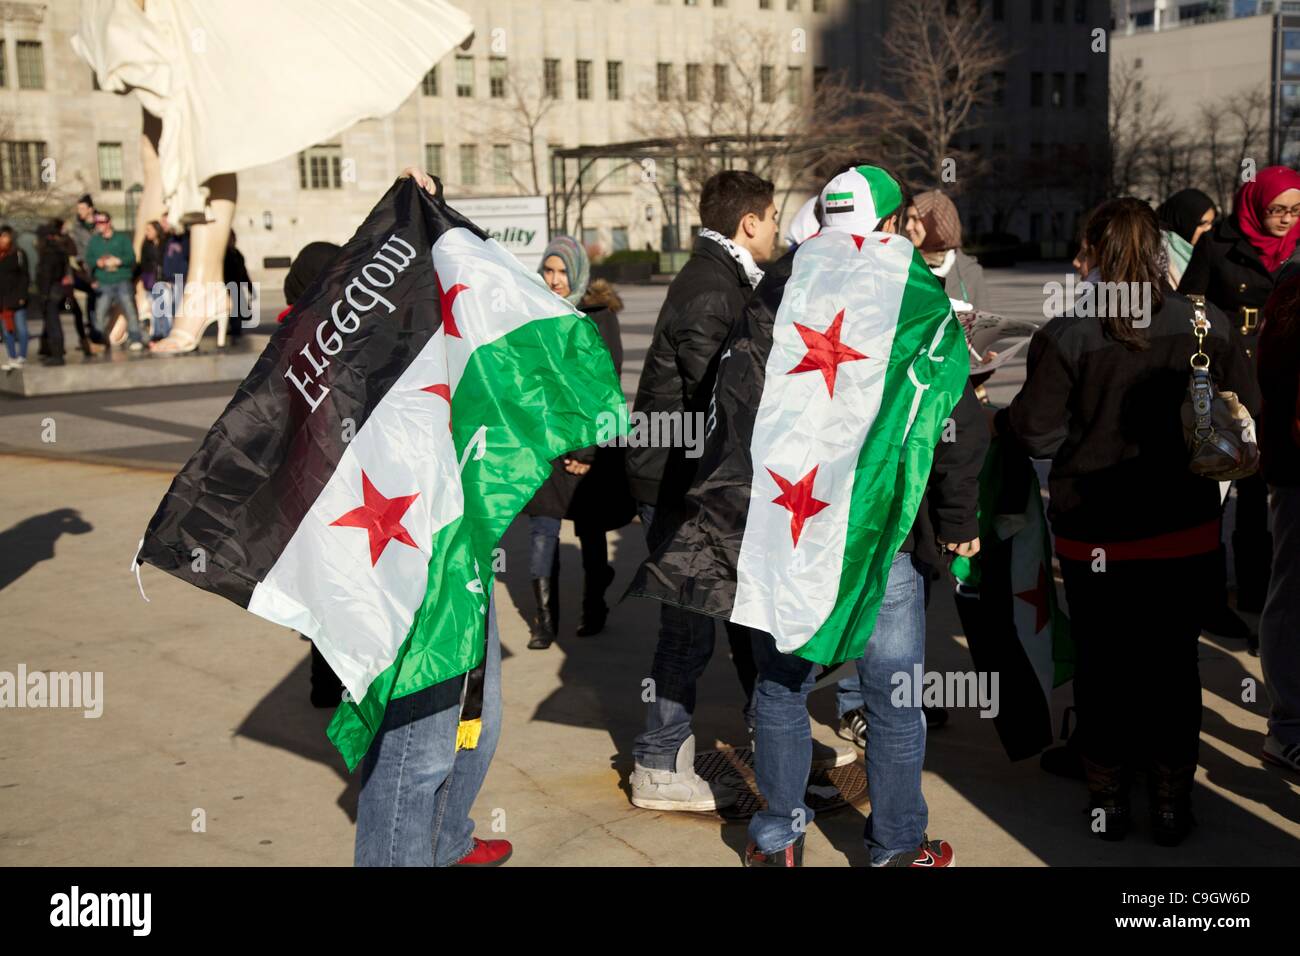 Chicago, USA, 29/12/2011. Protesters in Pioneer Court wrap themselves in Syrian flags with the word 'freedom' added. The demonstrators gathered to protest the Syrian government's treatment of its citizens. Stock Photo